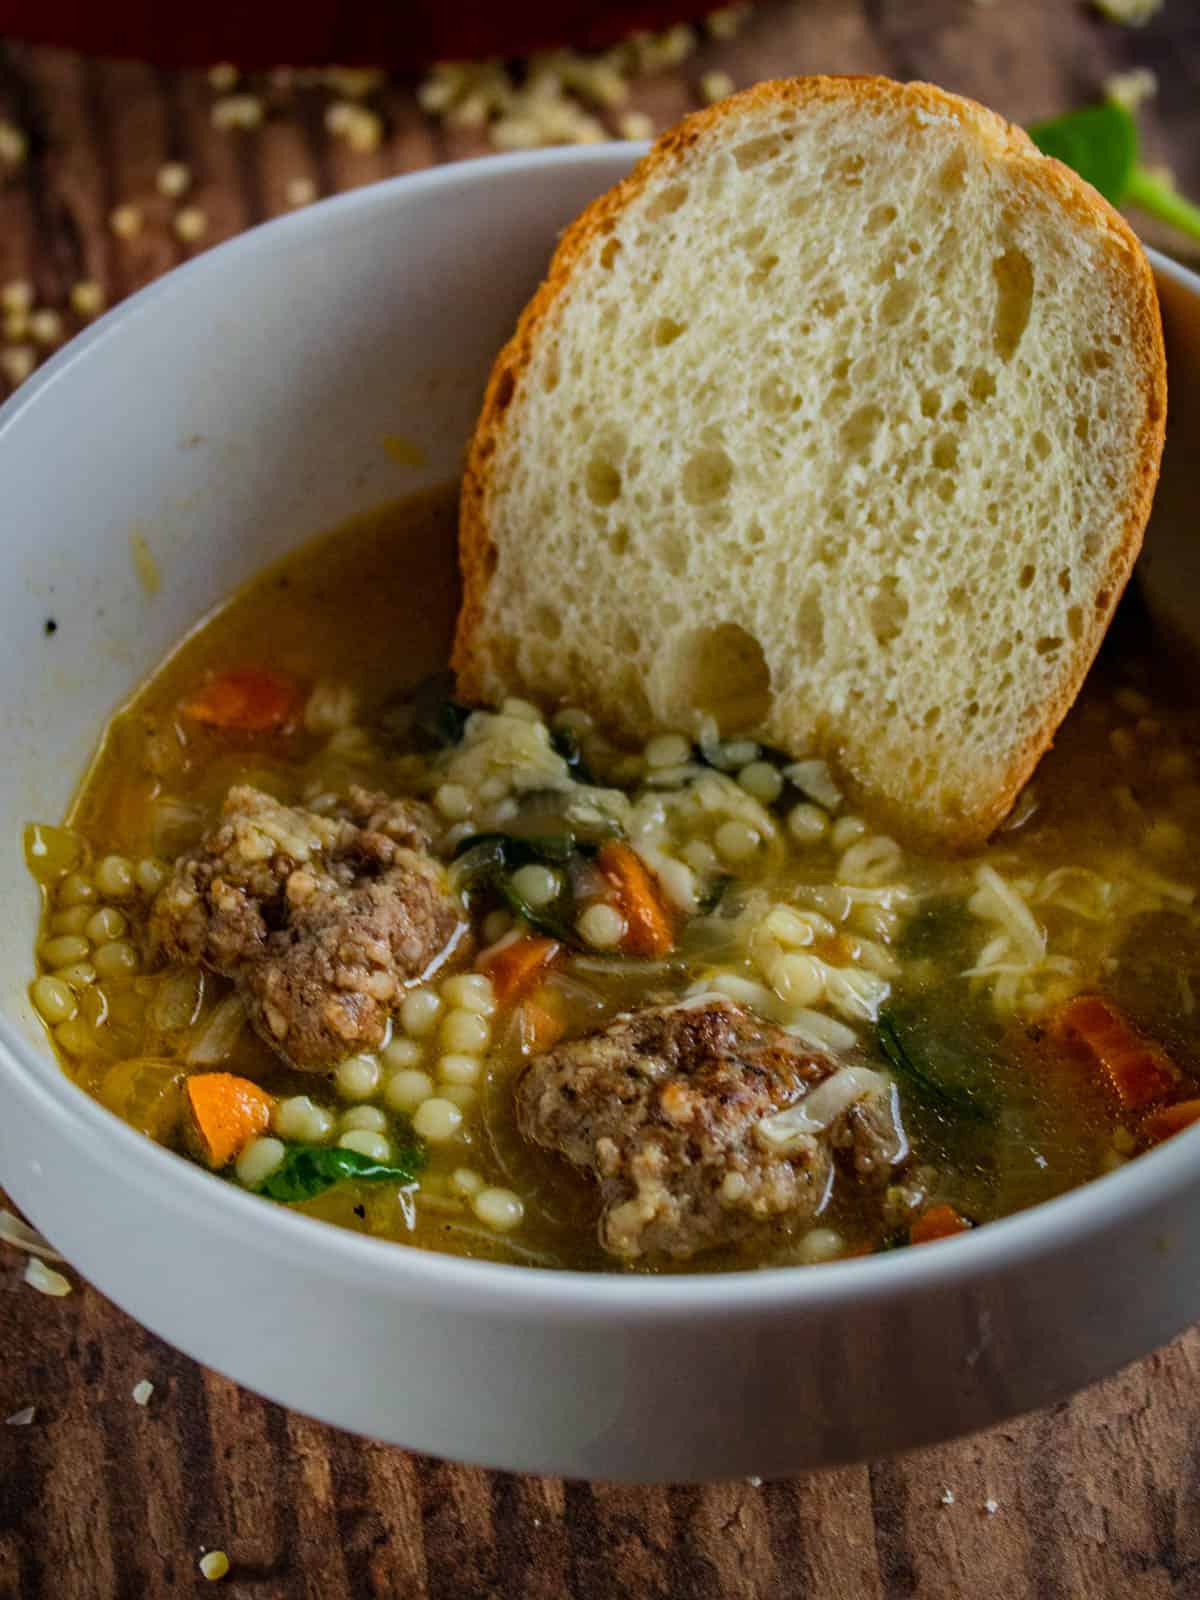 slice of french bread in a bowl of italian wedding soup with meatballs.